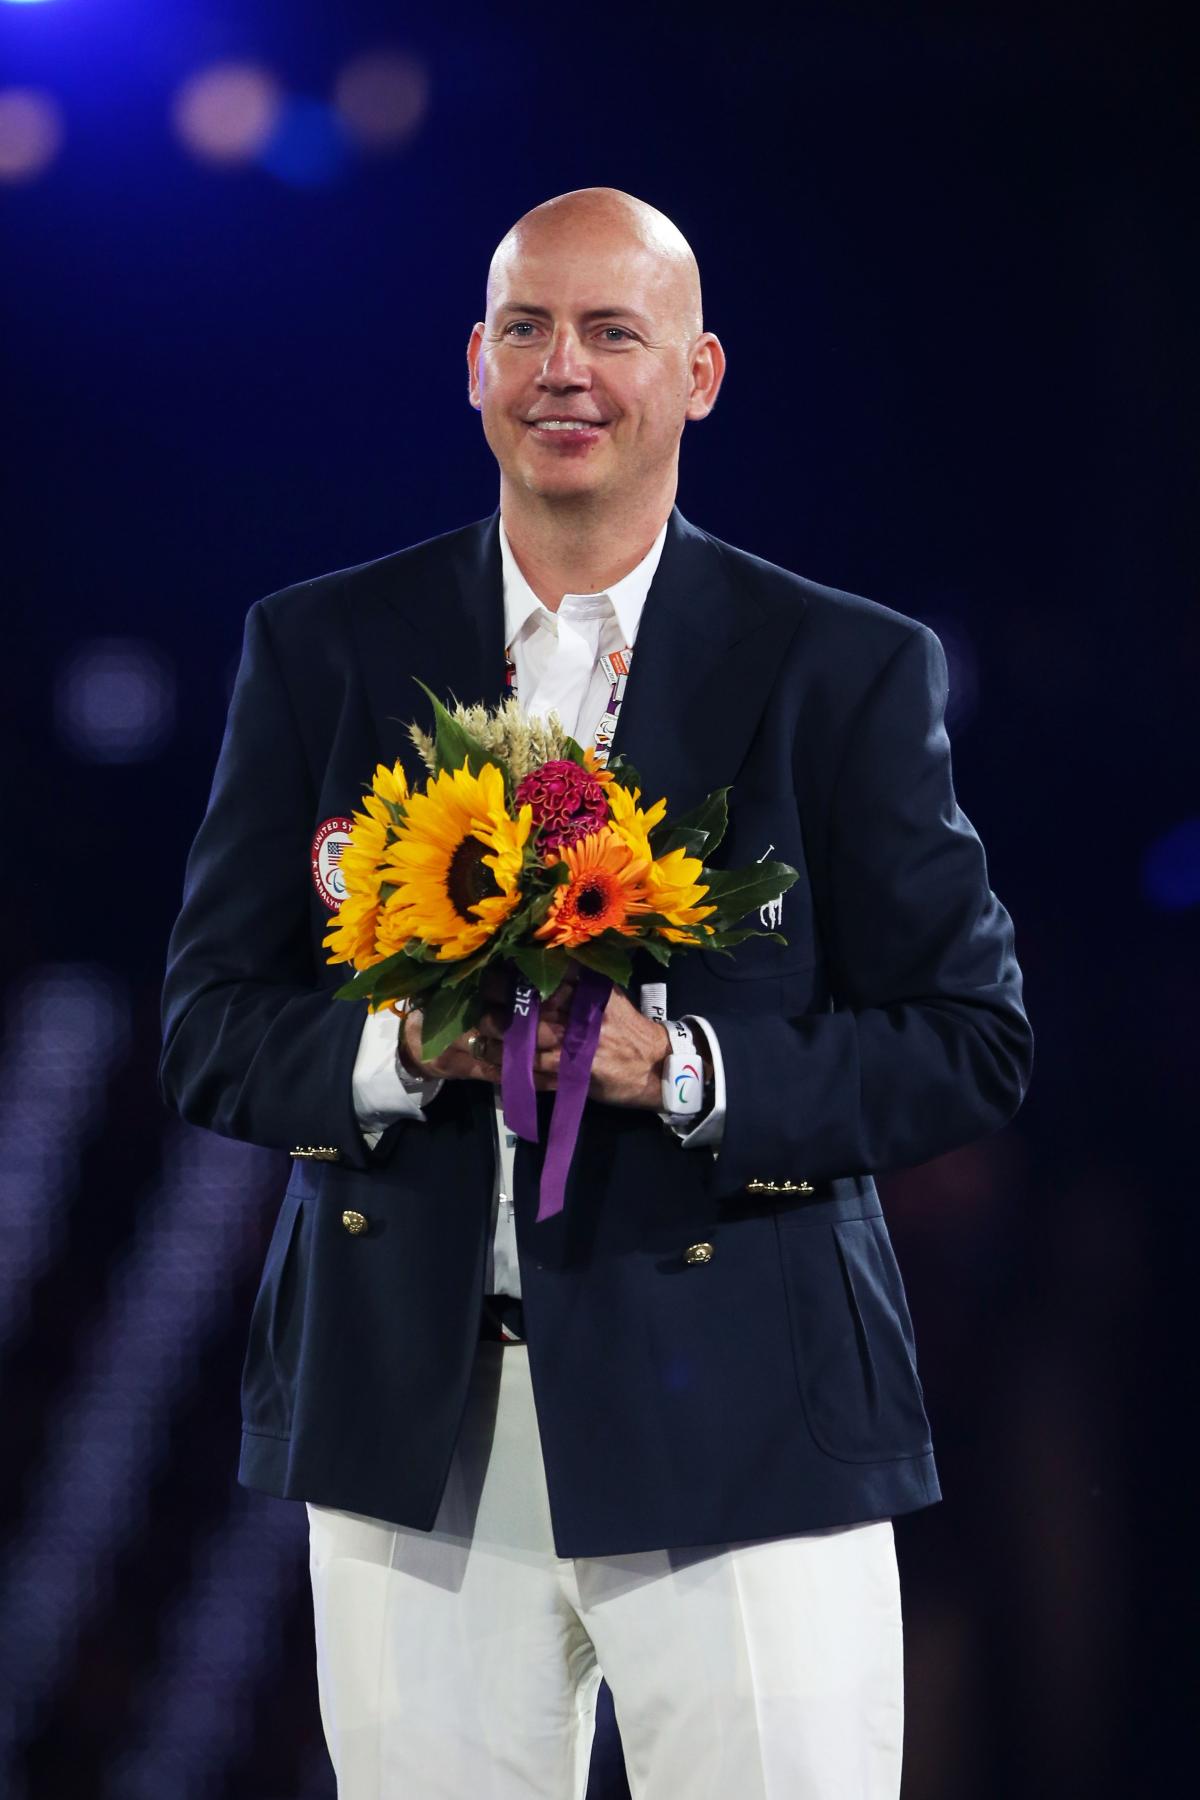 A picture of a smartly dress man, with light trousers and dark jacket holding a bunch of flowers.